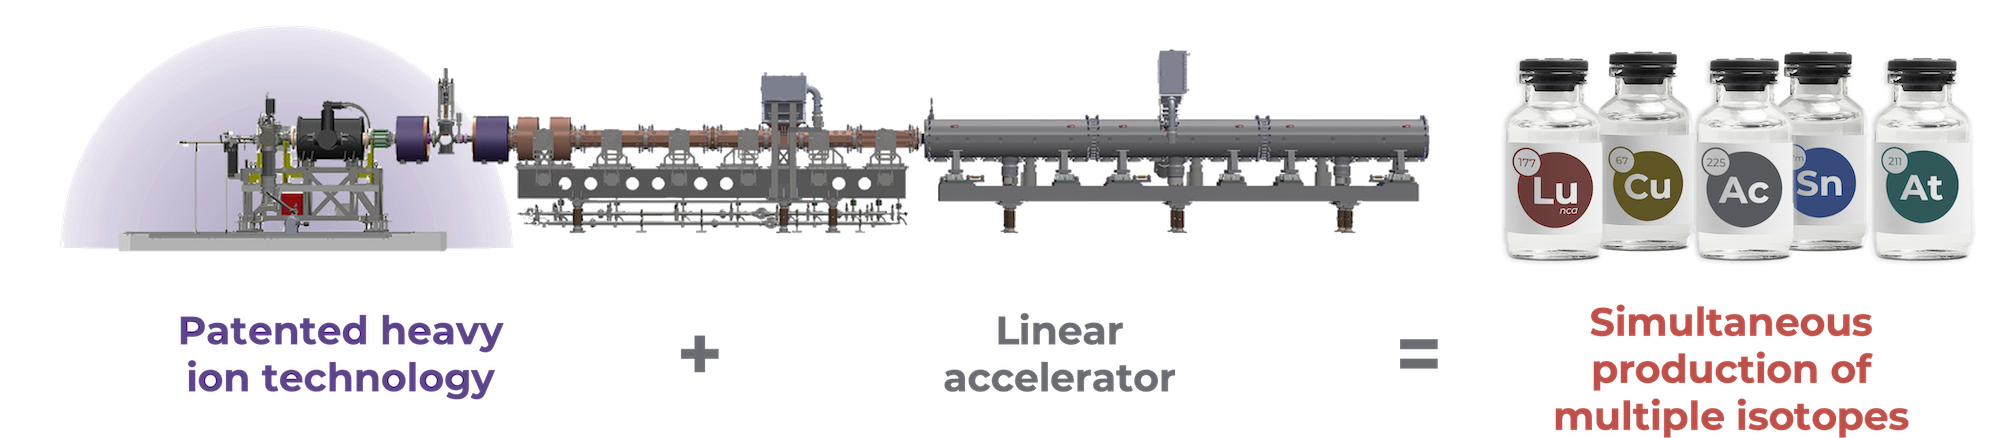 Image of linear accelerator and resulting isotopes